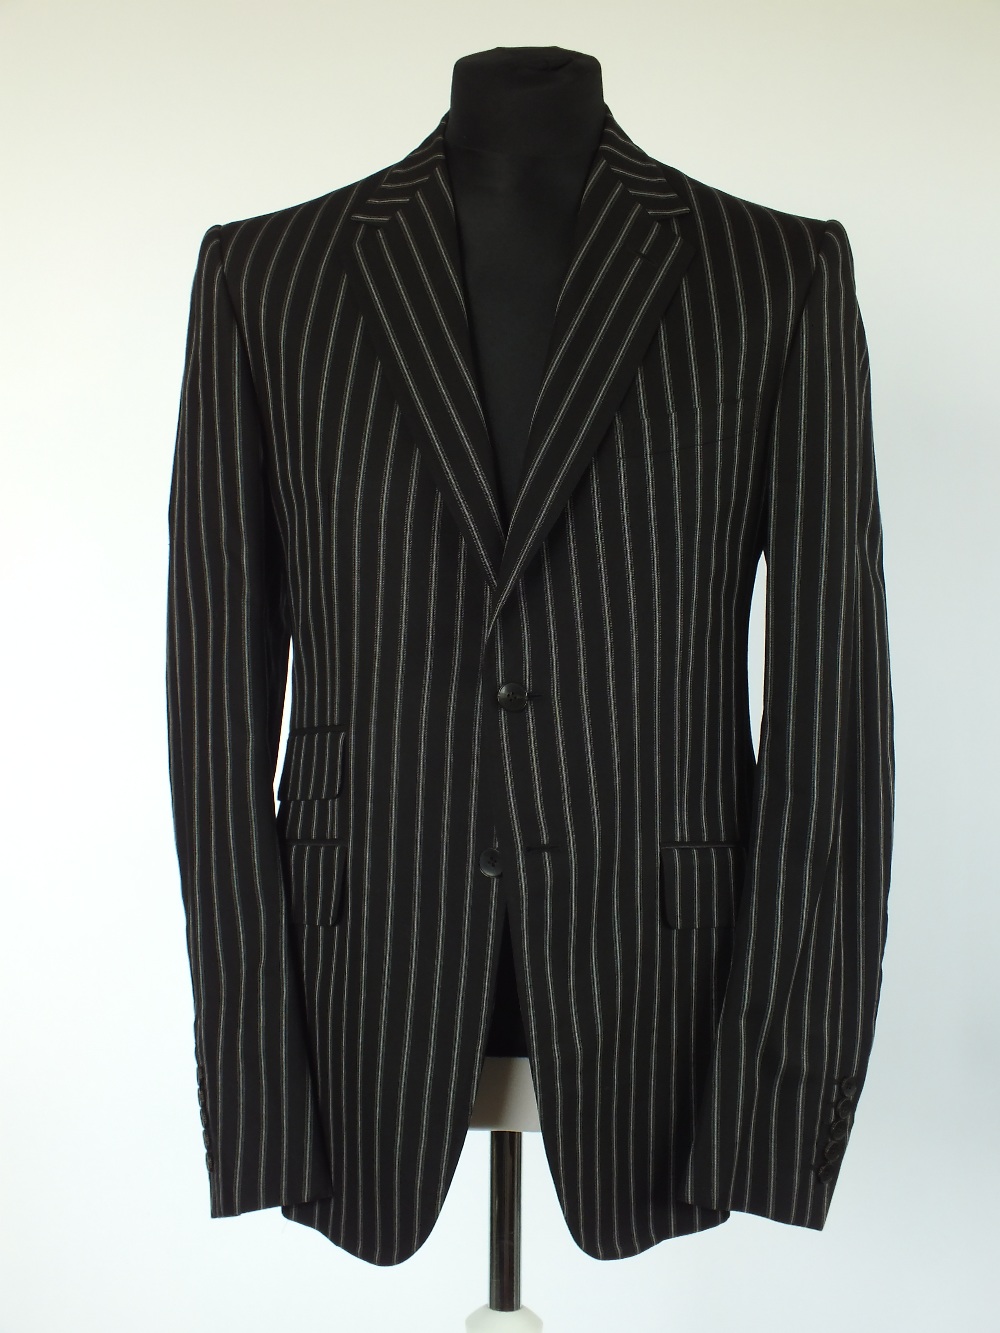 A Gucci jacket, black with white pinstripe, single vent, lined, Italian size 52L, 100% cotton